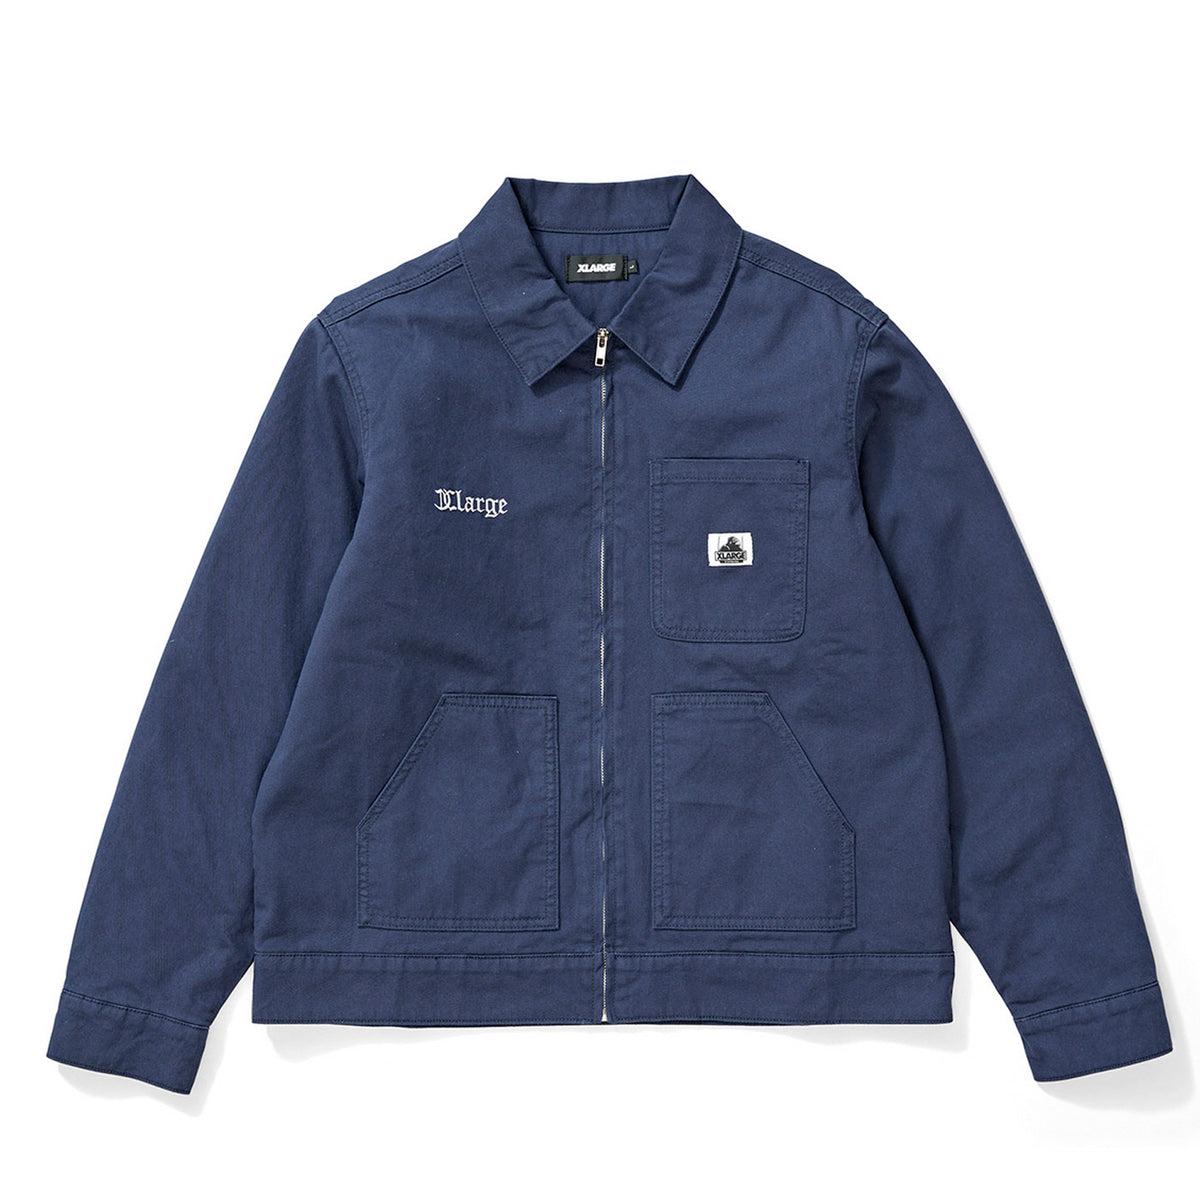 X-Large Patch Work Jacket Navy Sale X-Large Visit our store online